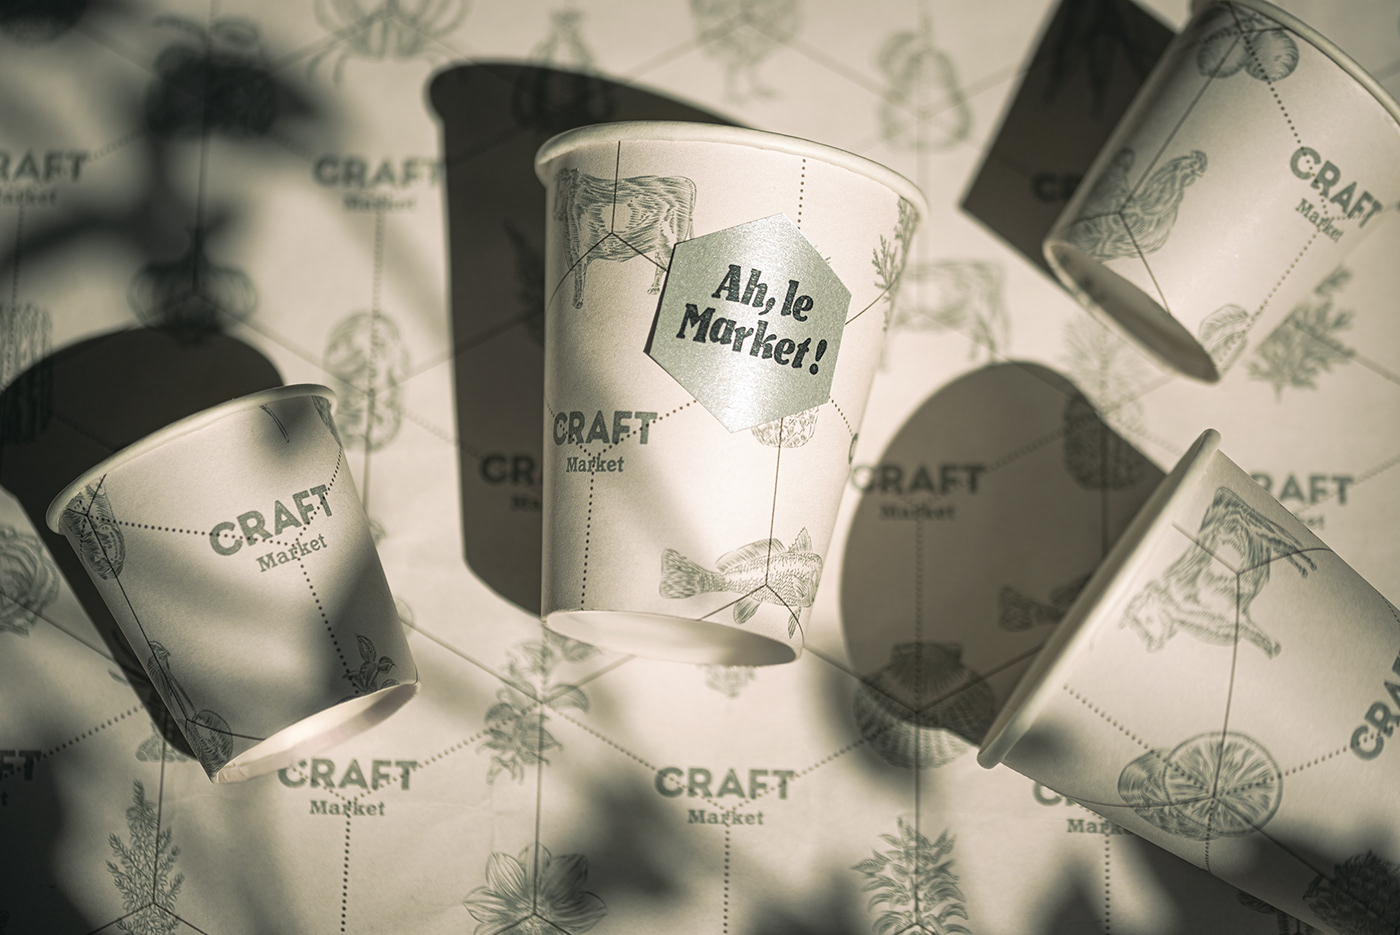 Closeup of CRAFT Market paper coffee coups with Toile de Jouy pattern.